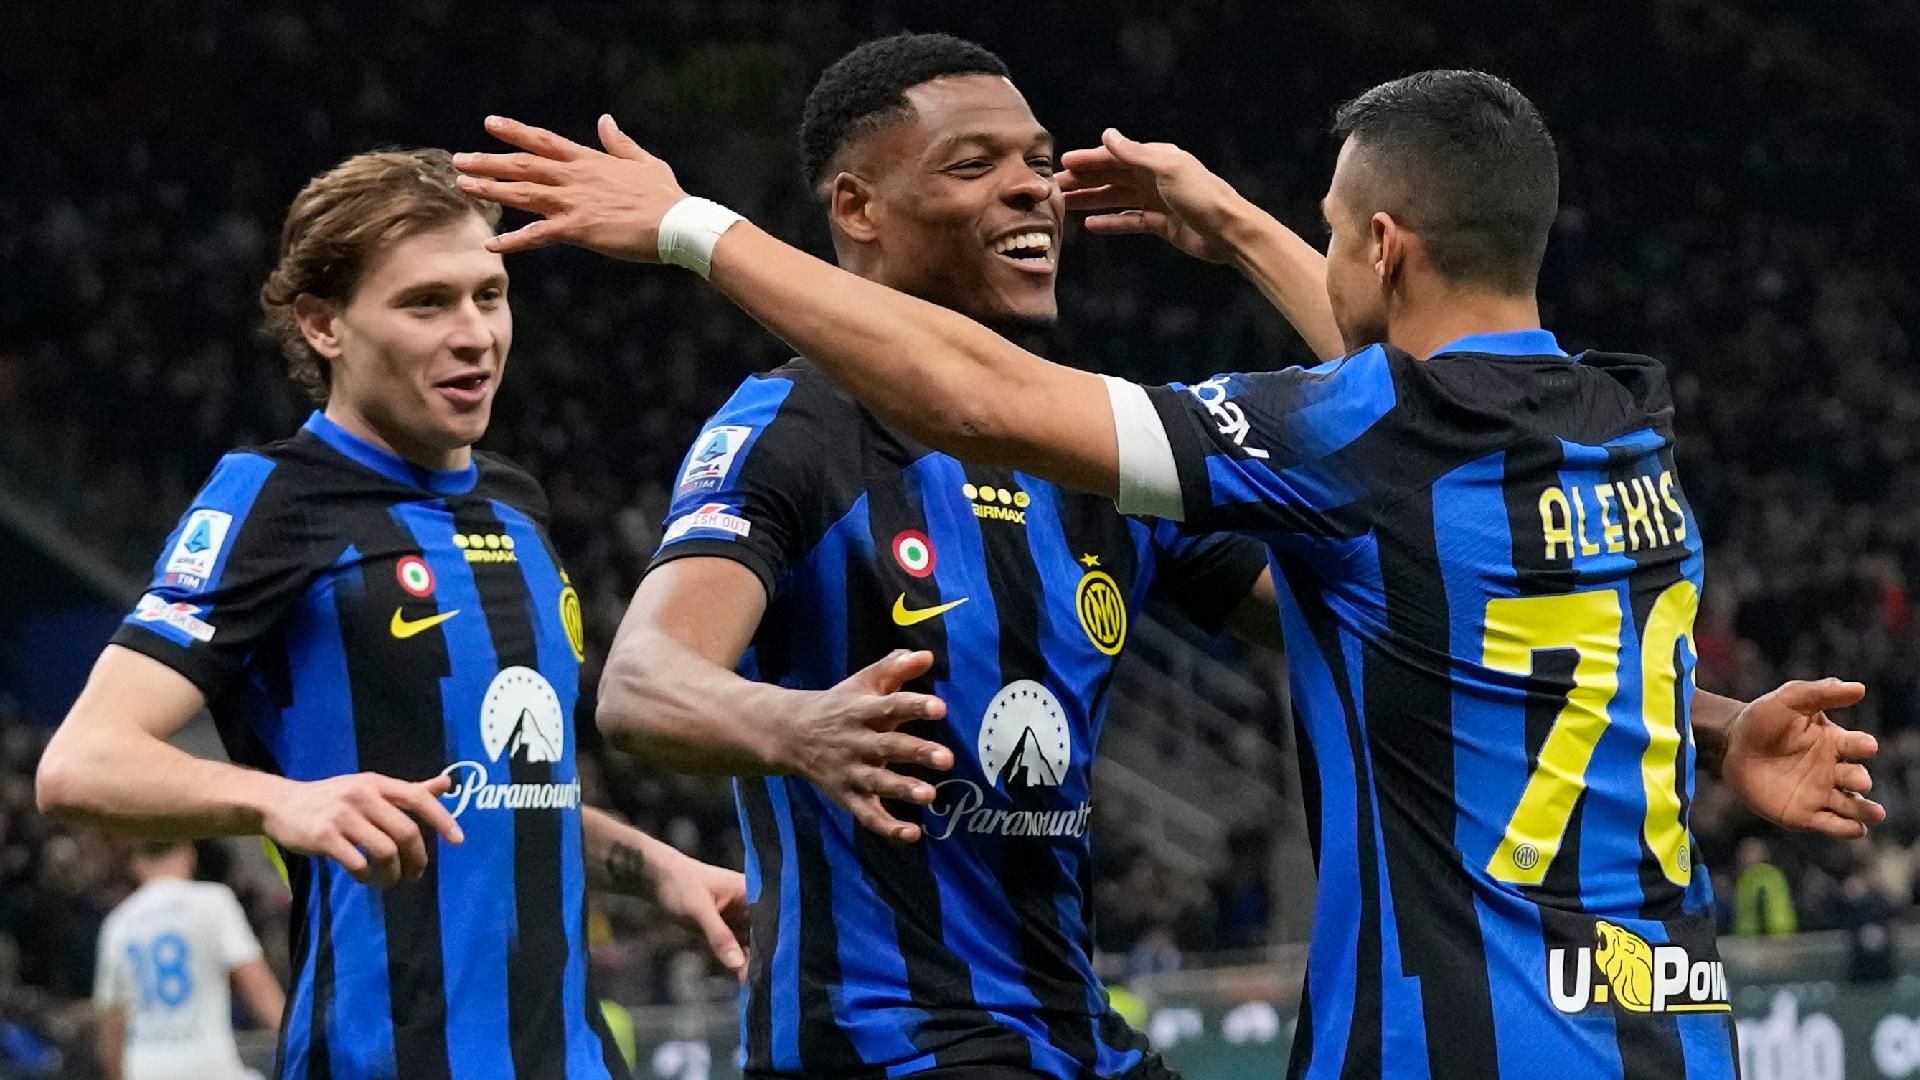 Inter Milan restore 14-point lead at top of Serie A with victory over Empoli